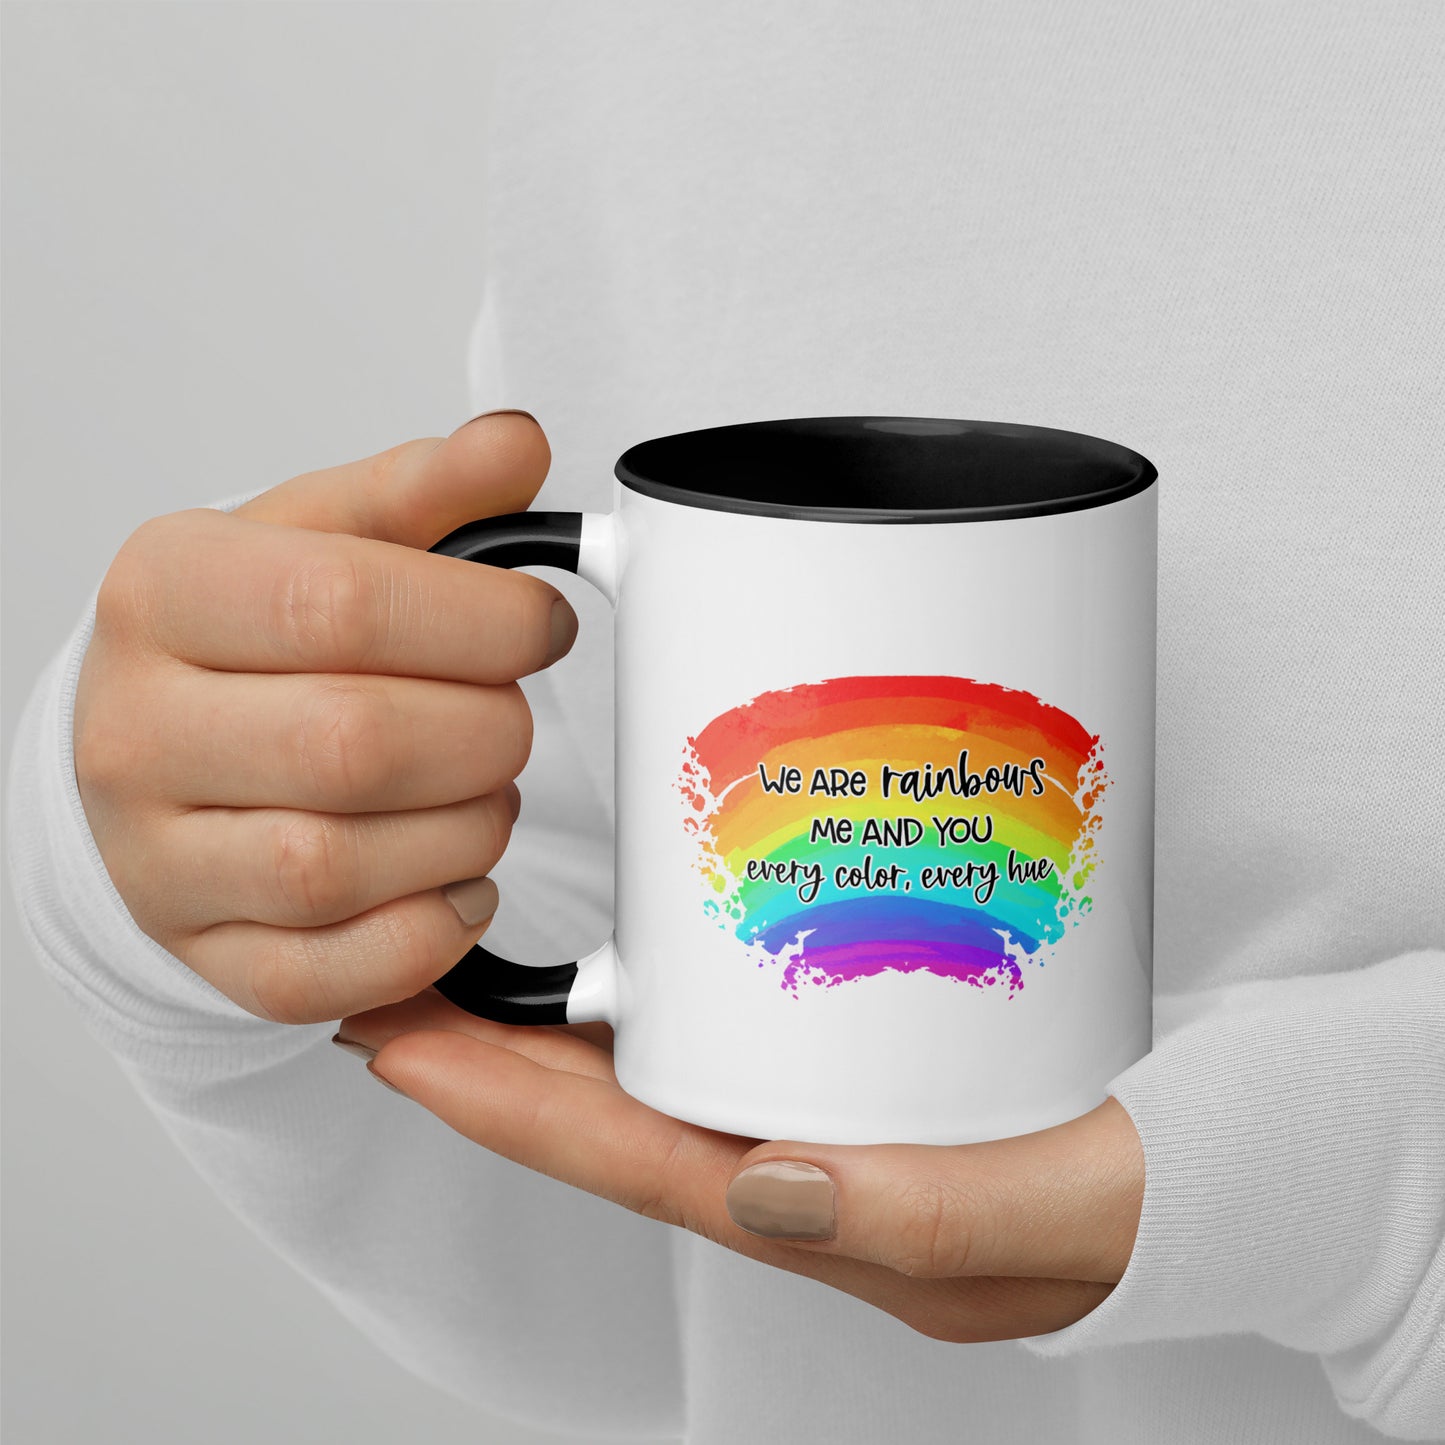 We Are Rainbows Mug in two sizes